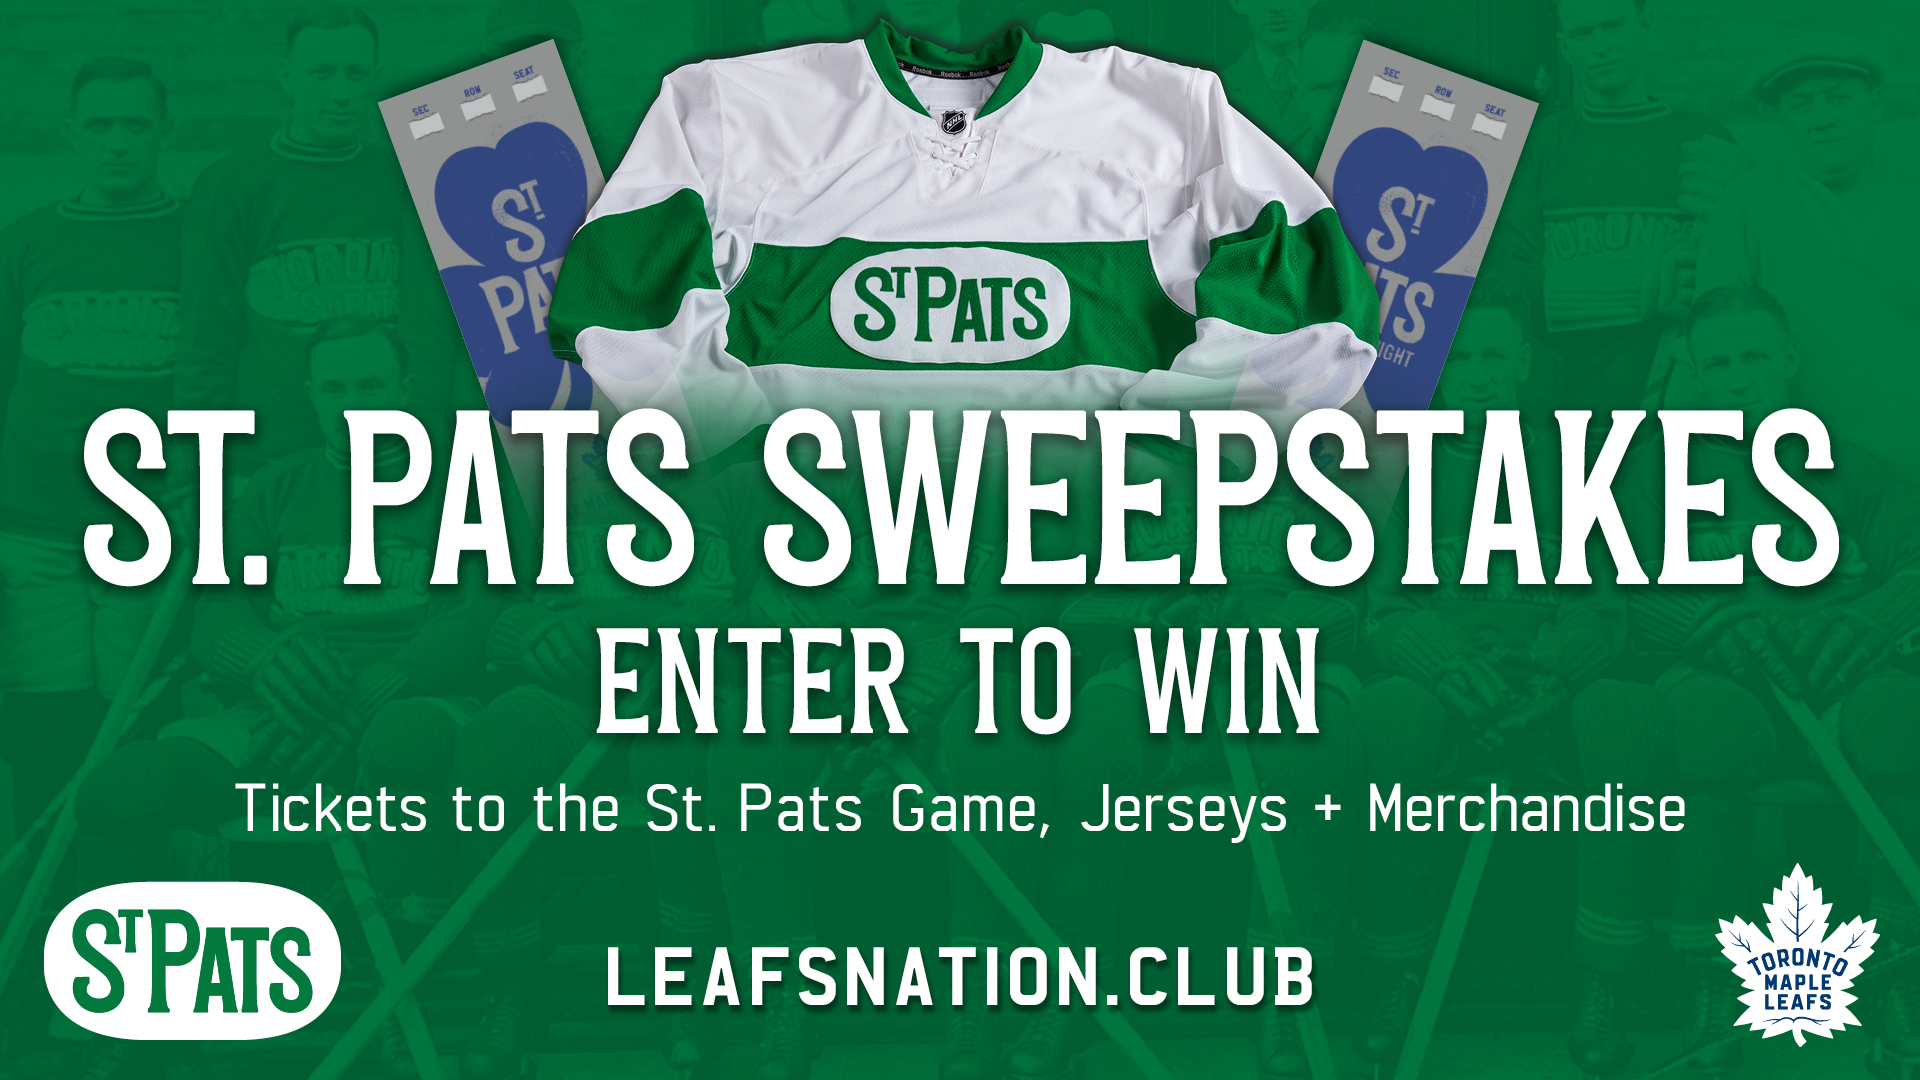 Leafs Nation Contest - St. Pats Sweepstakes